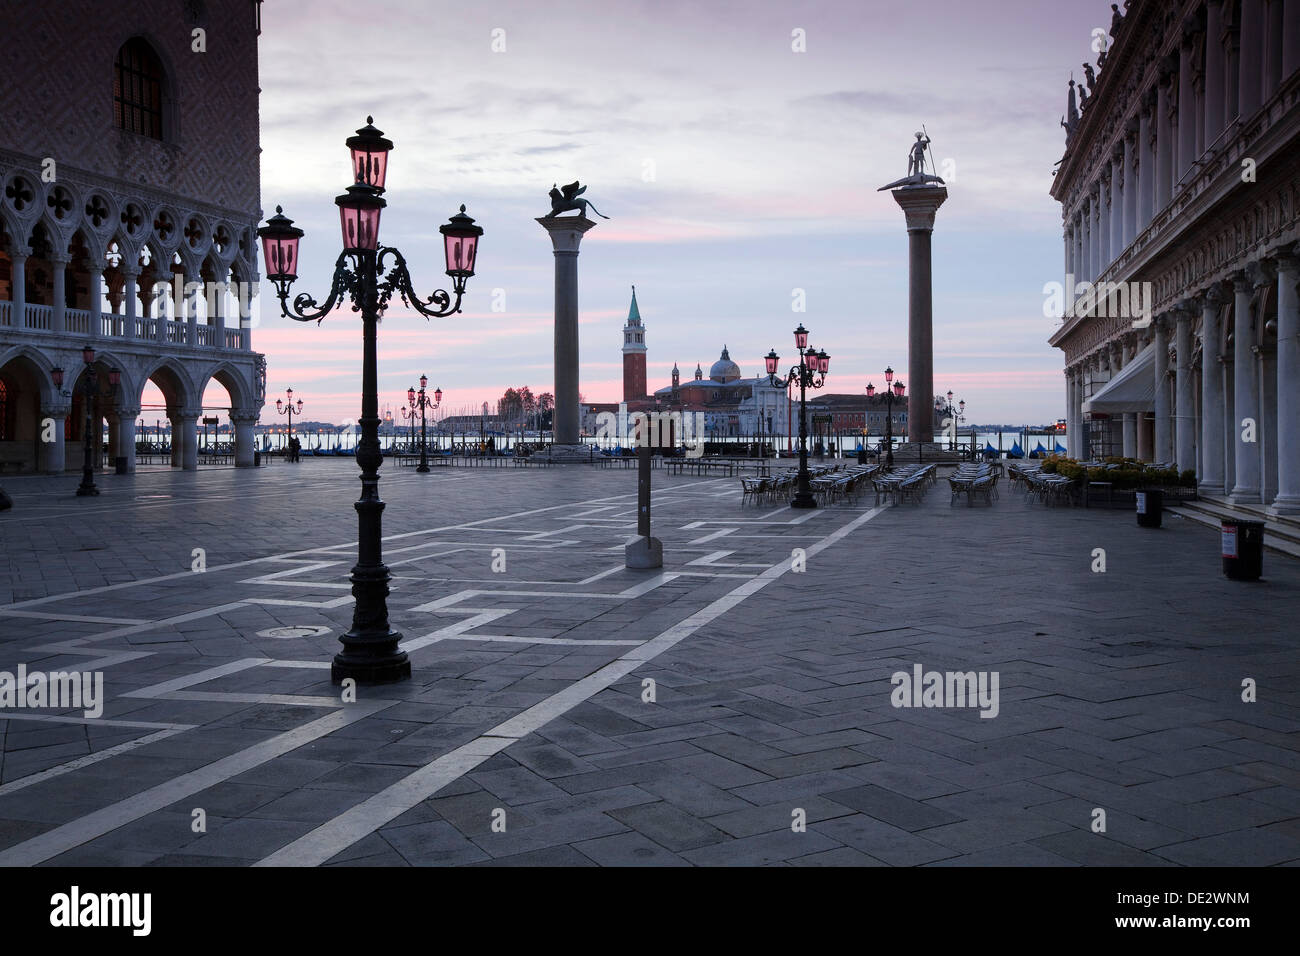 San giorgio stock - and dusk at hi-res Alamy maggiore images photography